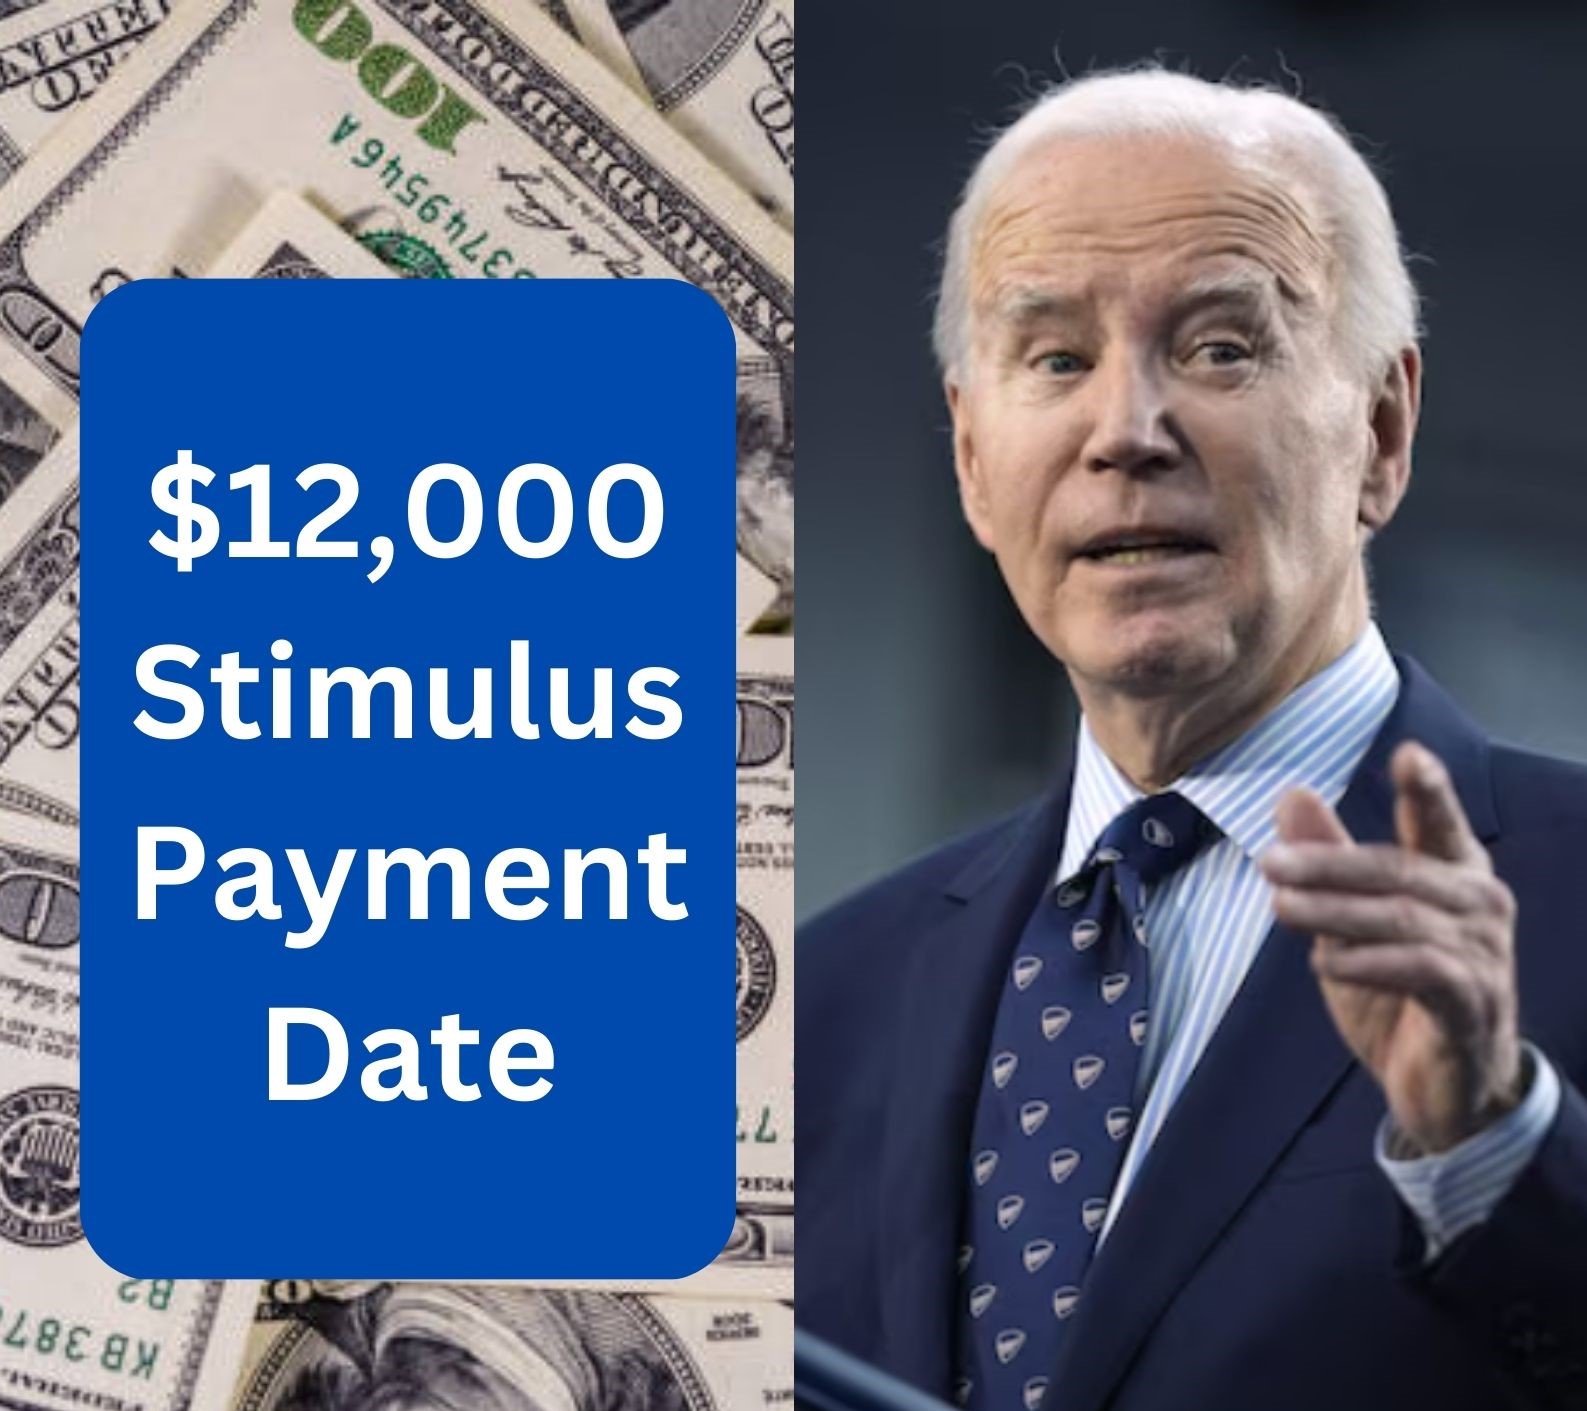 $12,000 Stimulus Payment Date For Low Income Seniors: When Is This Payment Being Made?